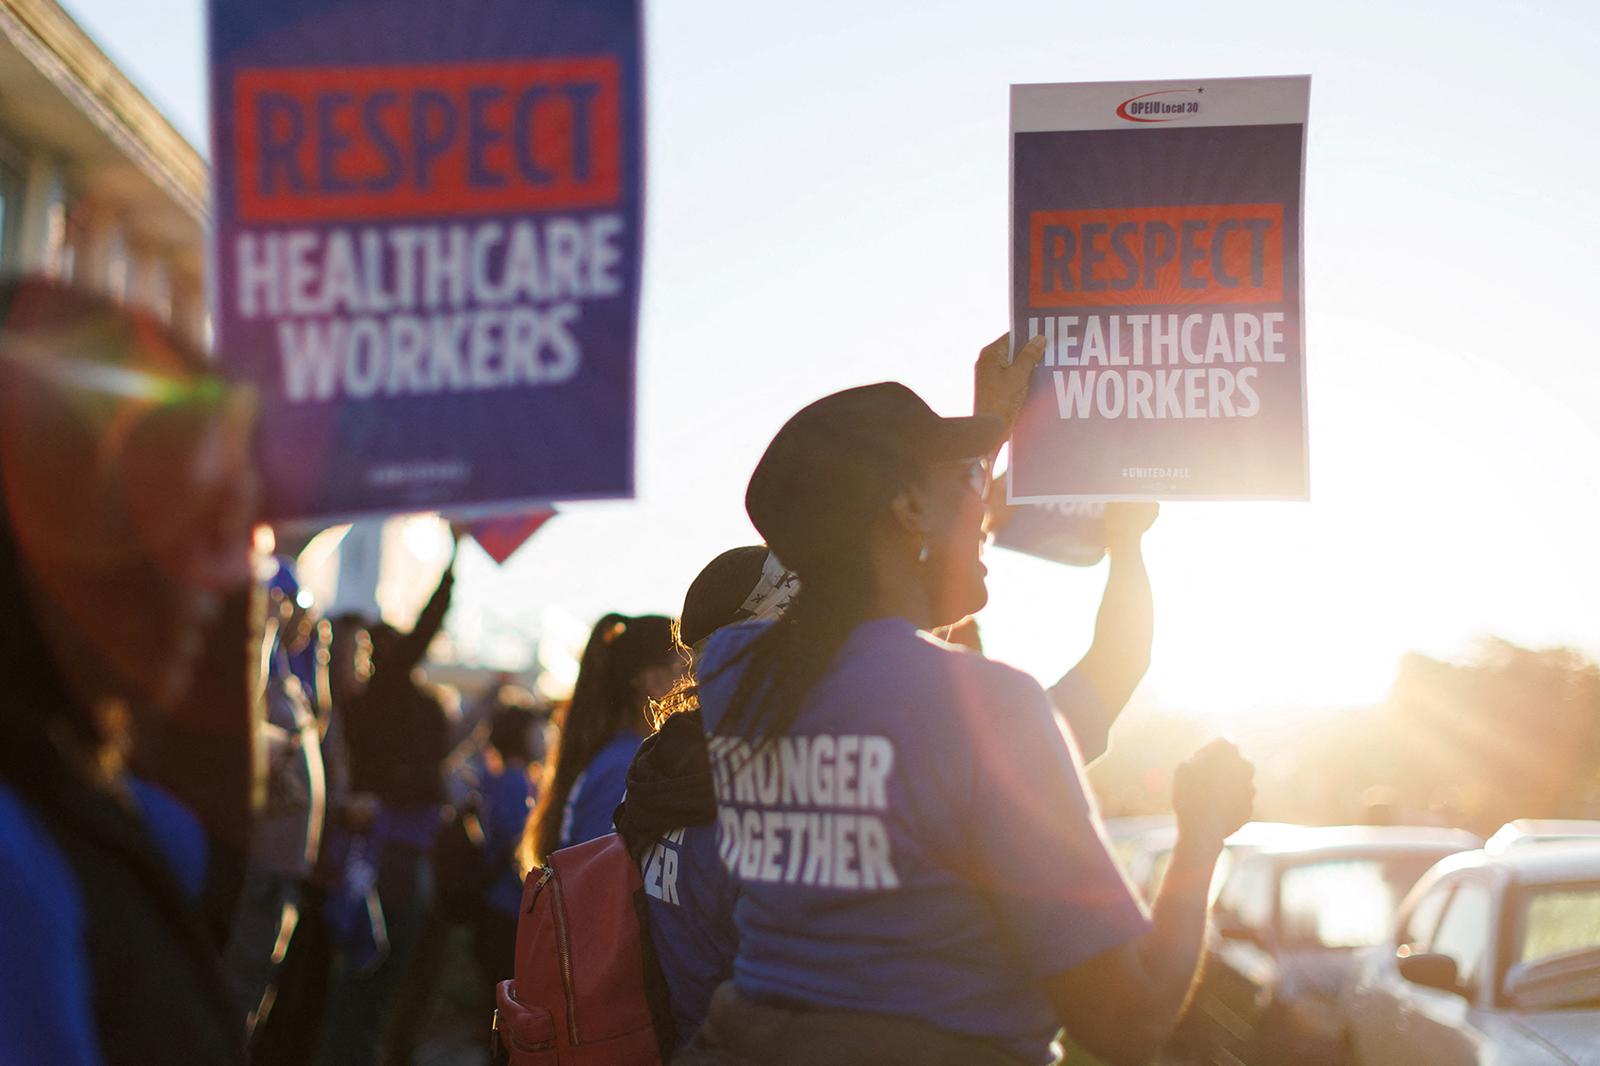 A coalition of Kaiser Permanente Unions representing 75,000 healthcare workers started a three day strike across the United States over a new contract. People are seen holding placards in San Diego, California, on October 4.